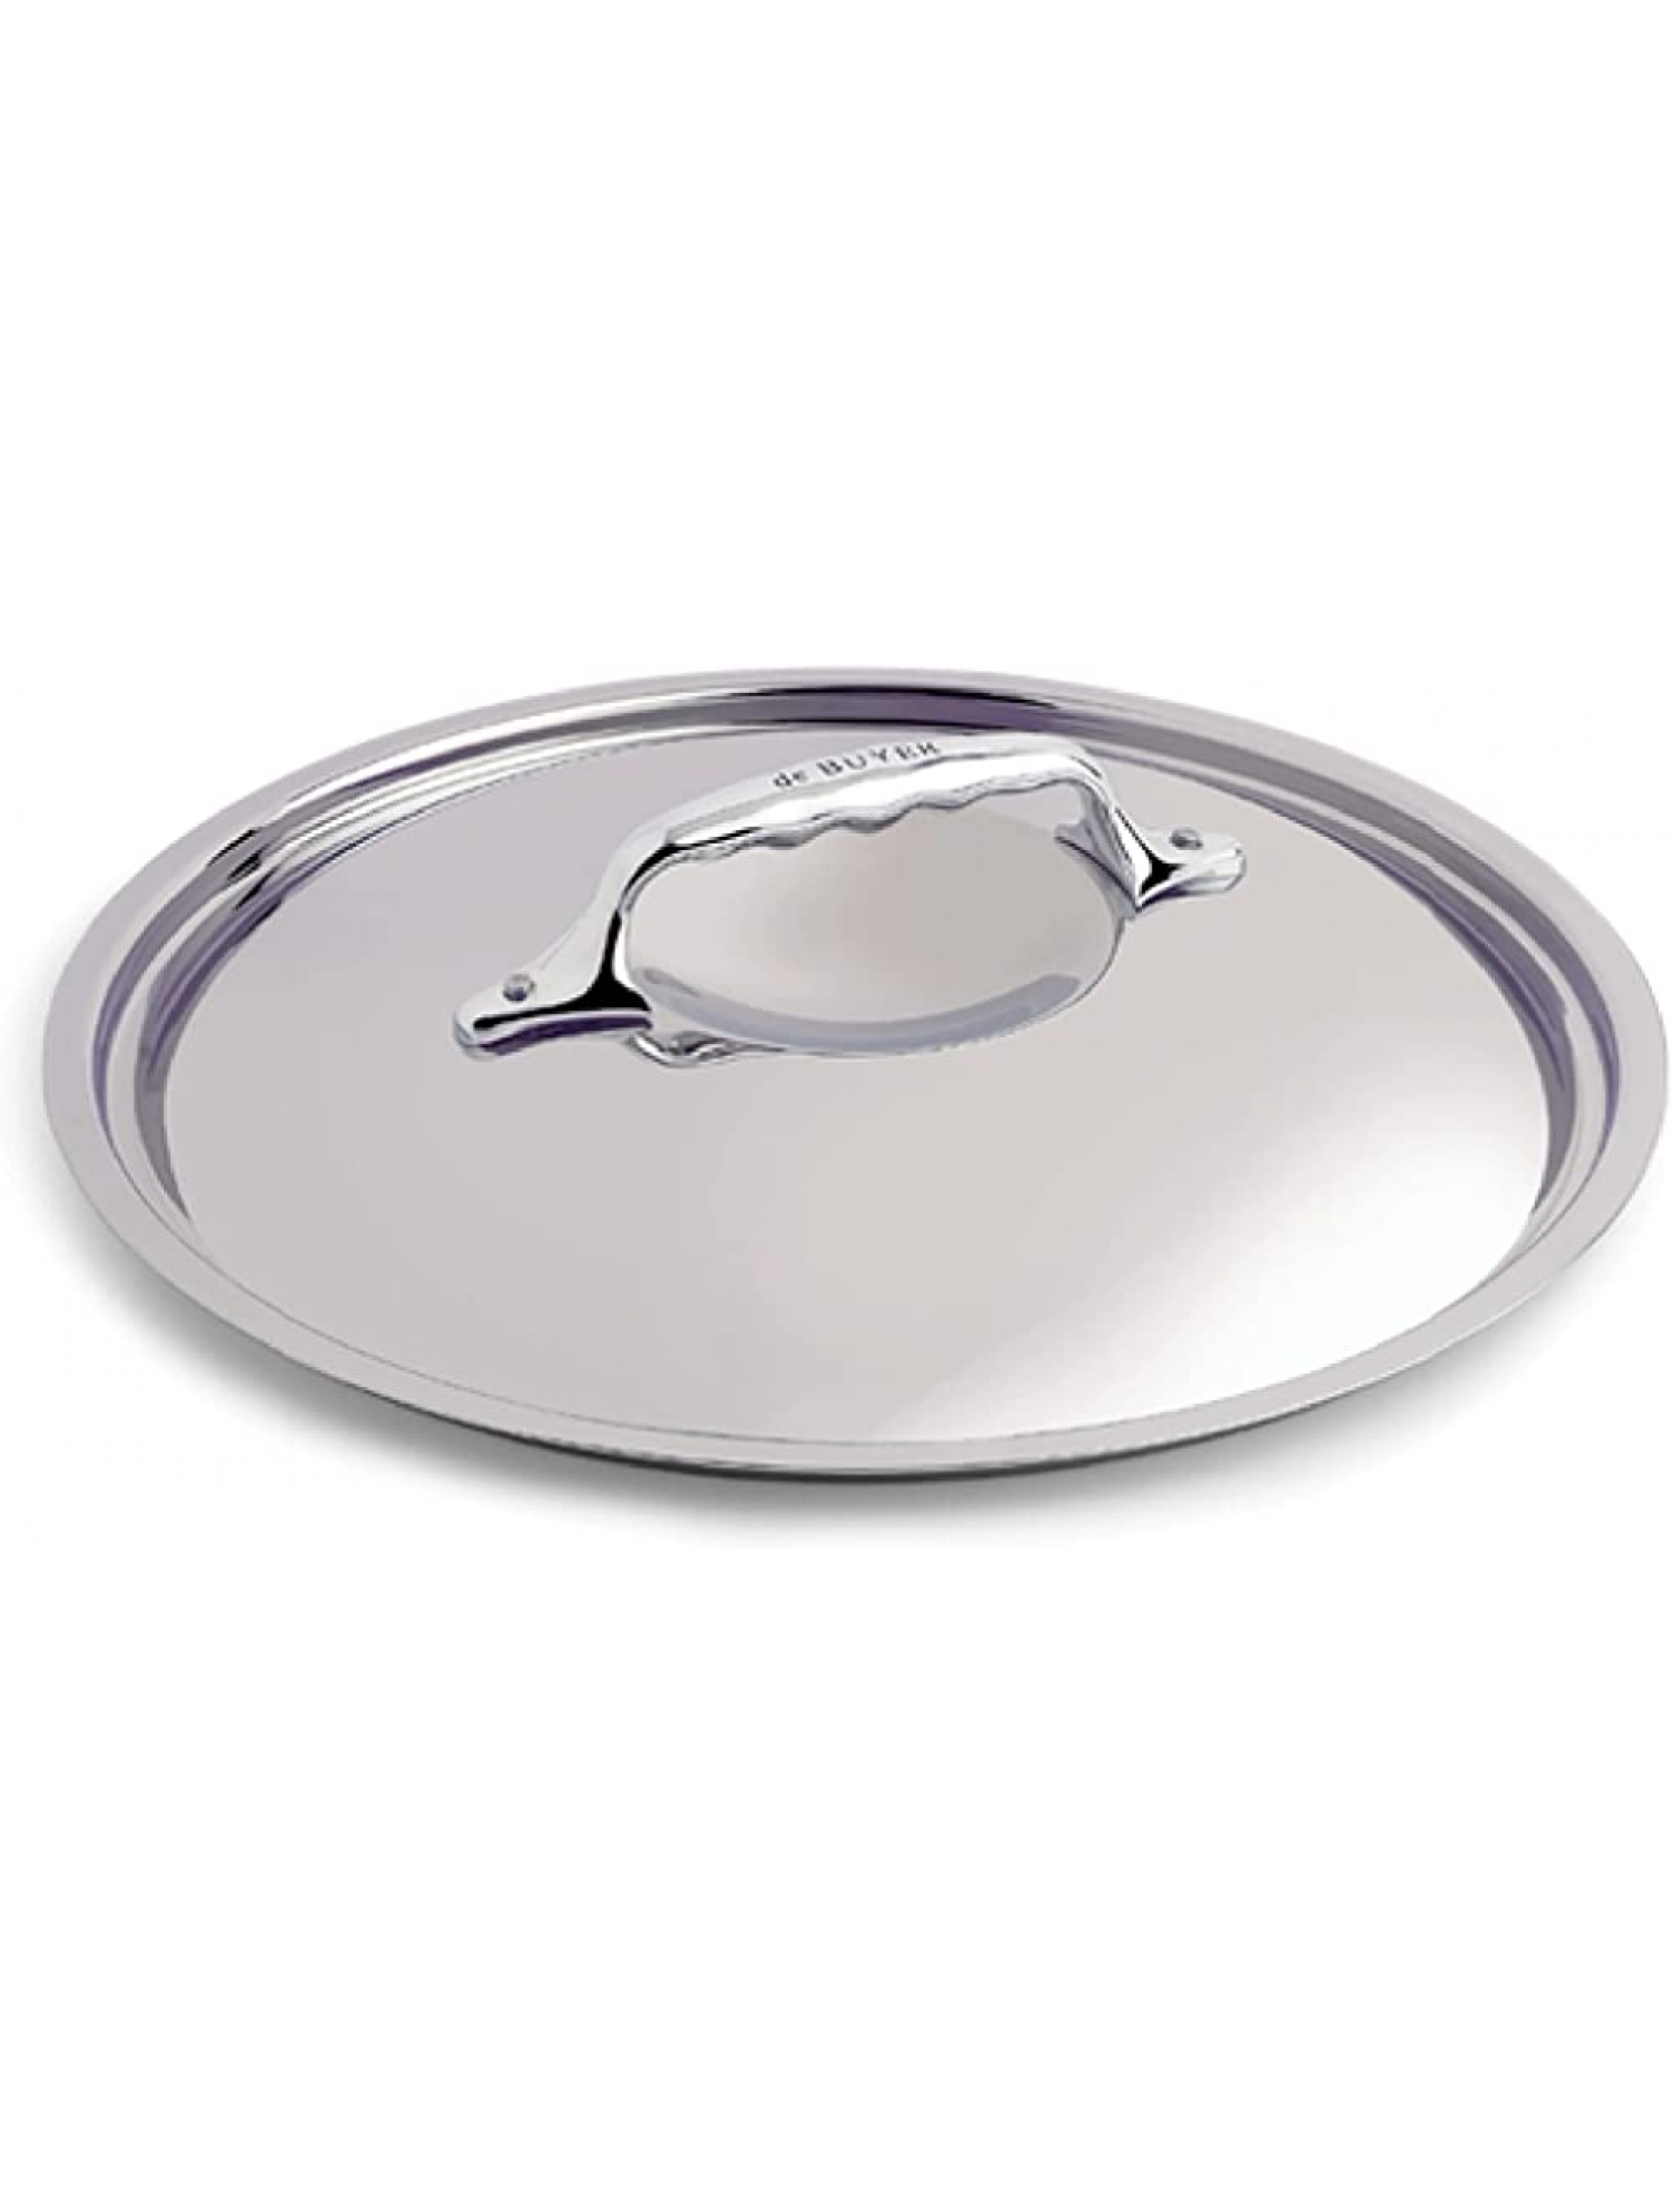 de Buyer Prima Matera Lid Stainless Steel Lid with an Ergonomic Handle Cookware Oven and Dishwasher Safe 7 - B9NIV3VL2